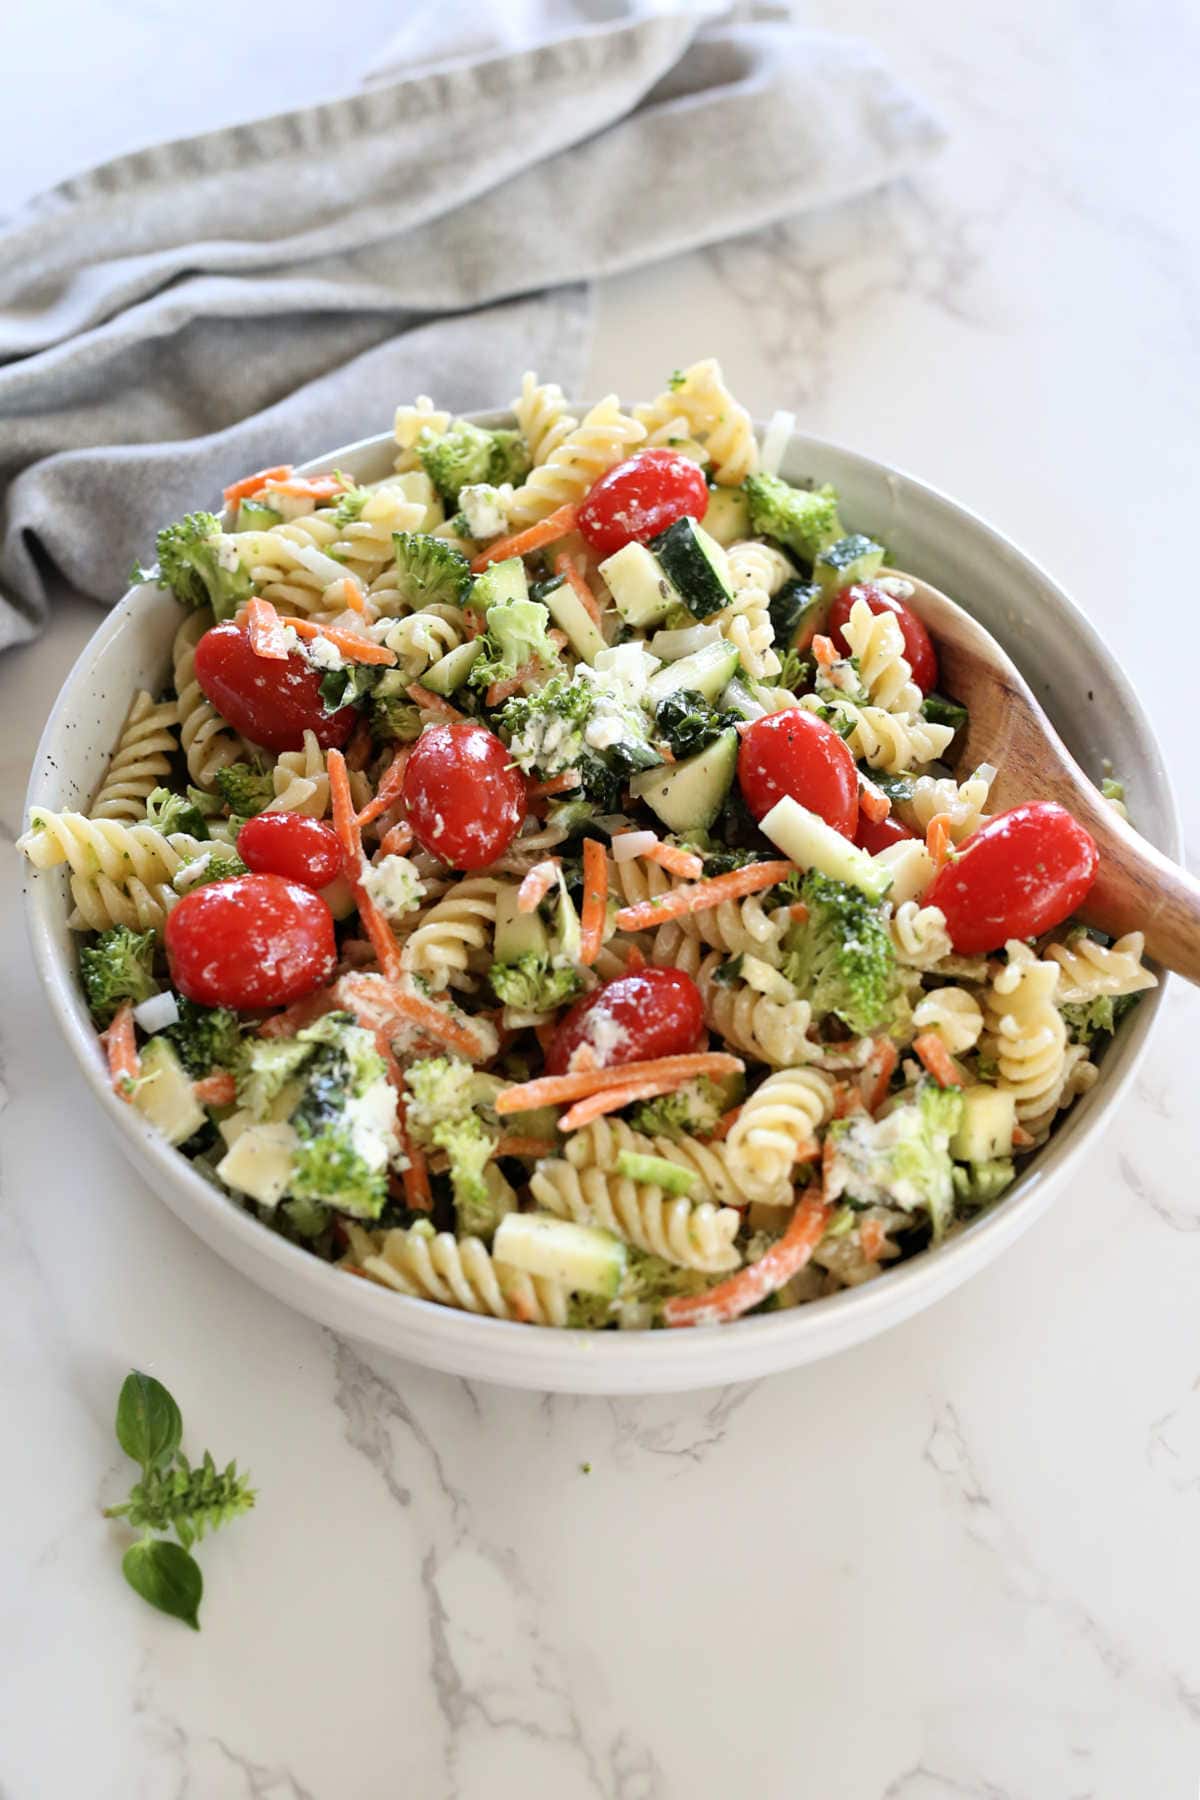 Pasta salad made with gluten-free noodles, cucumbers, zucchini, tomatoes, goat cheese, Italian dressing in a bowl with a serving spoon.